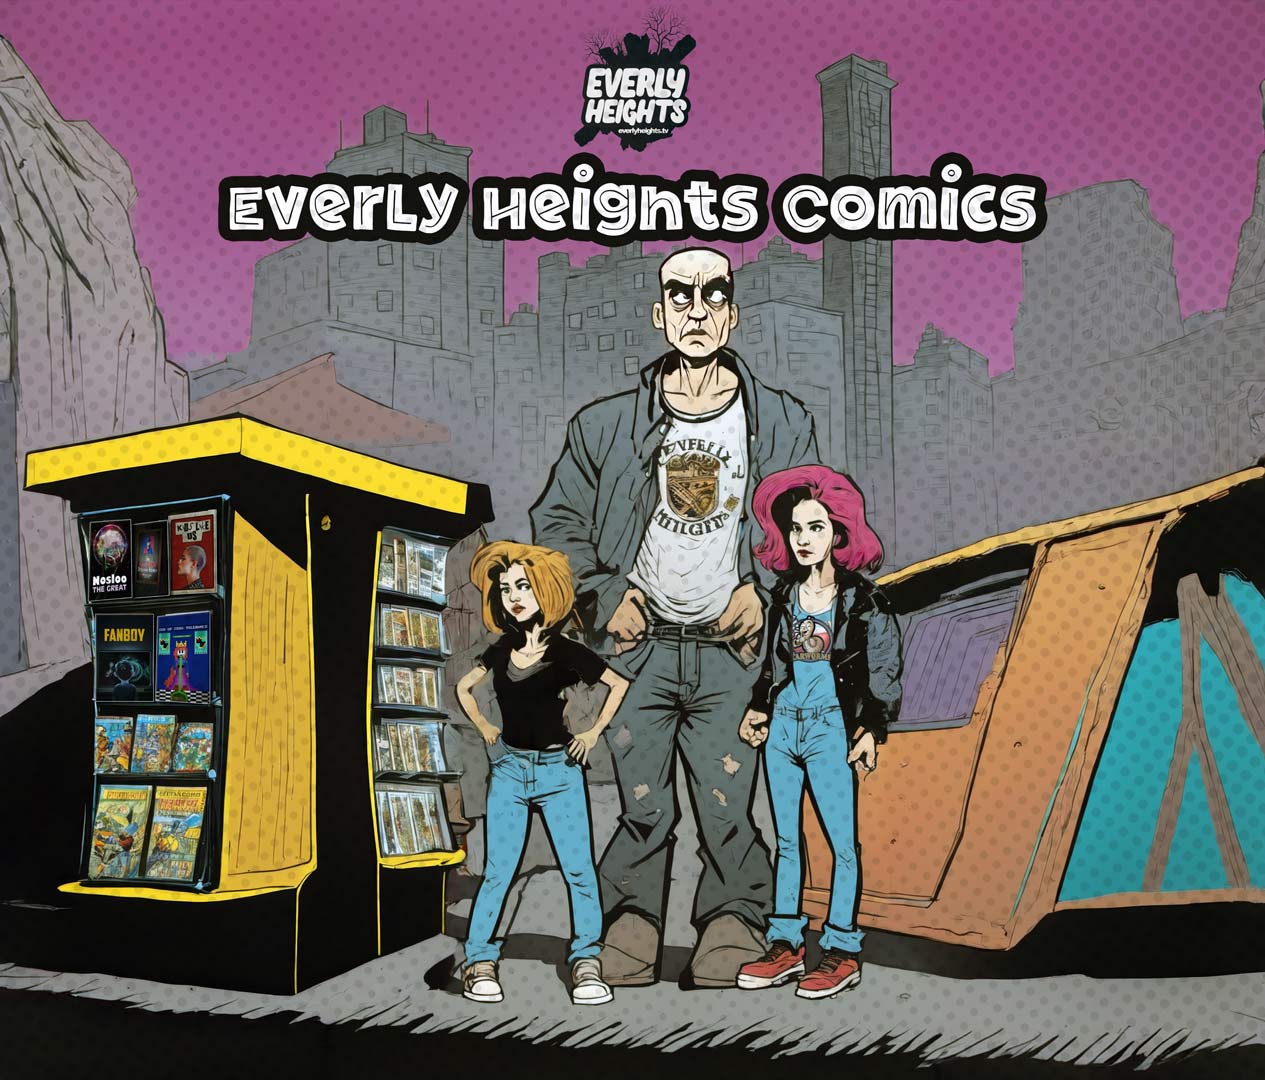 Everly Heights Comics, create comic book art using the Everly Heights Story Studio tools